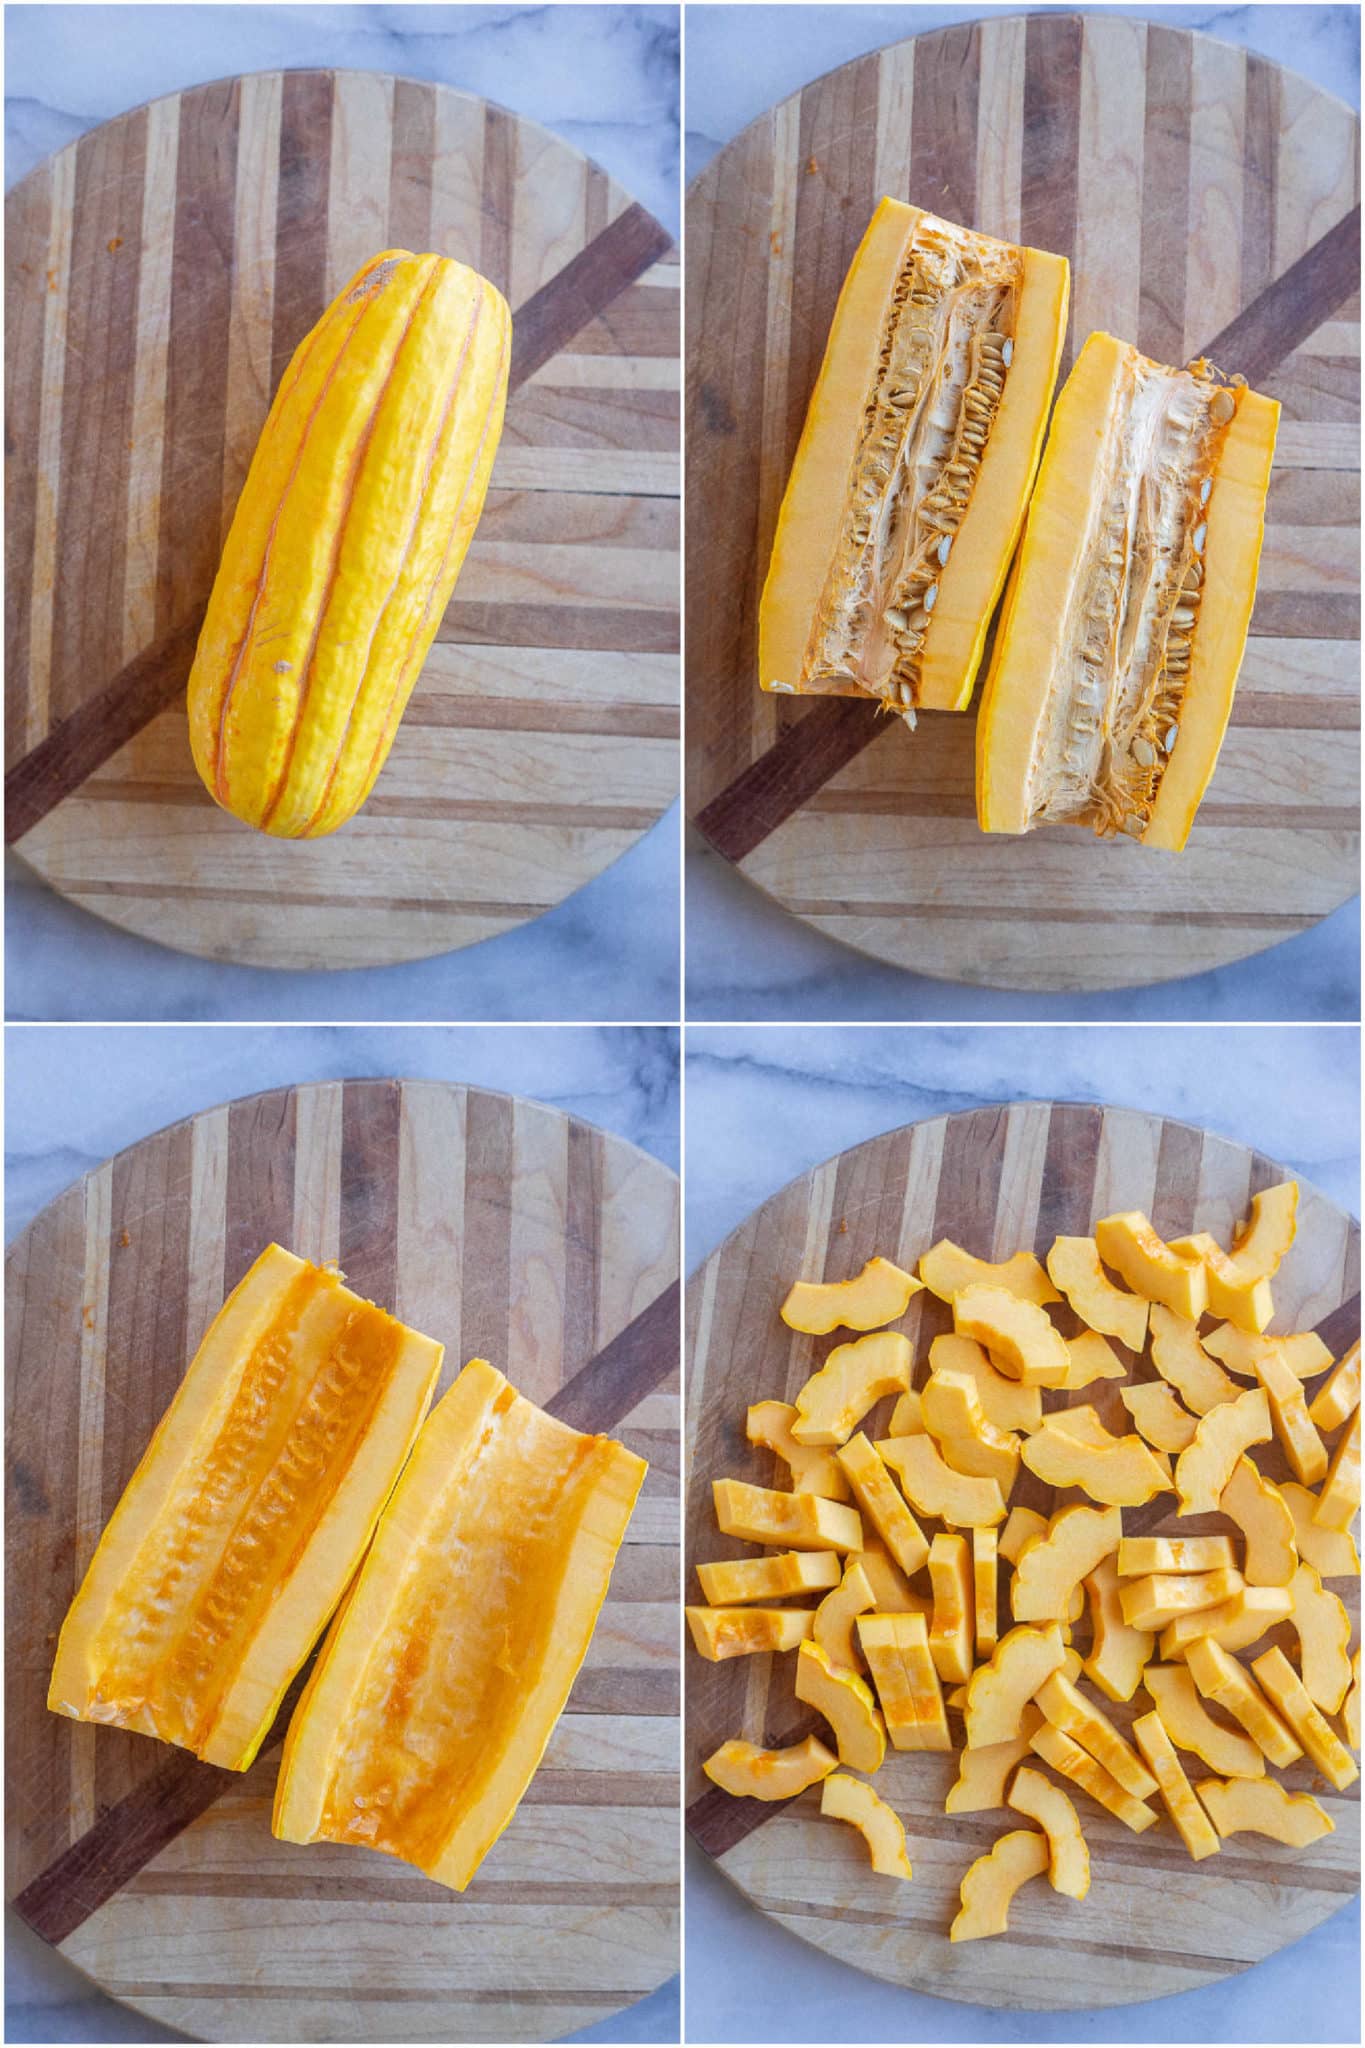 showing step by step instructions on how to cut up a delicata squash into little pieces